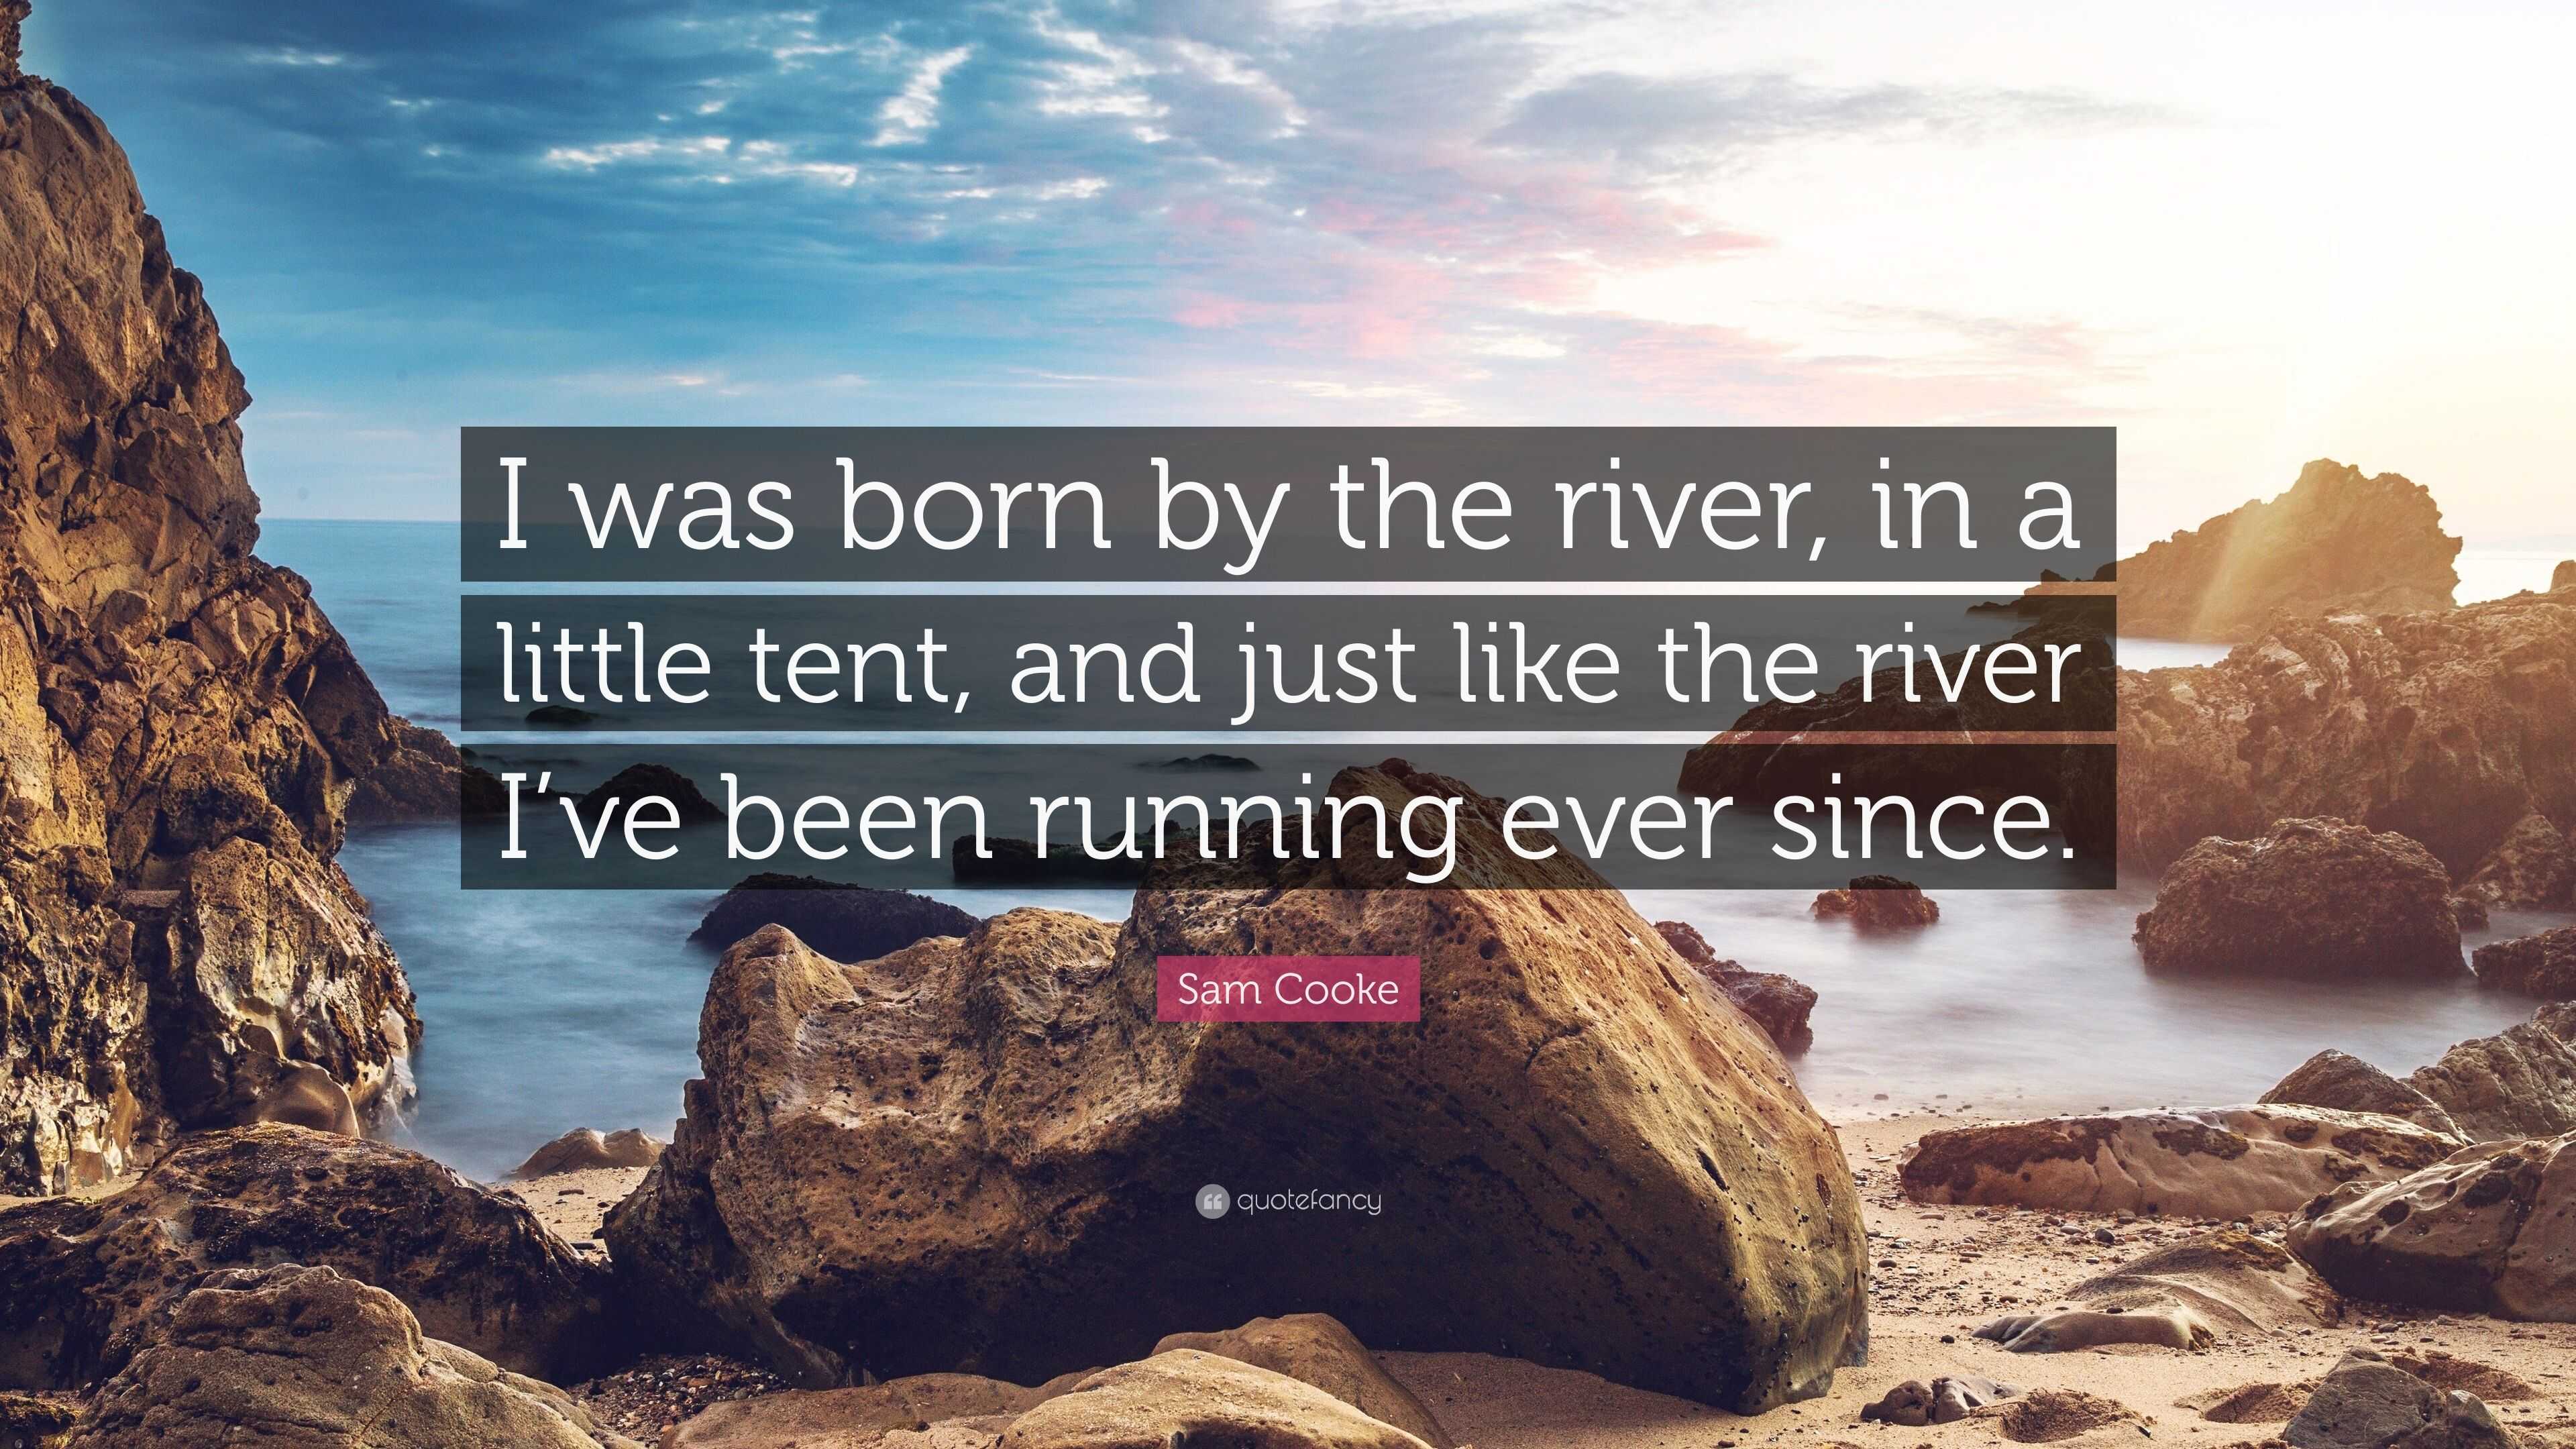 Sam Cooke Quote I Was Born By The River In A Little Tent And Just Like The River I Ve Been Running Ever Since 7 Wallpapers Quotefancy